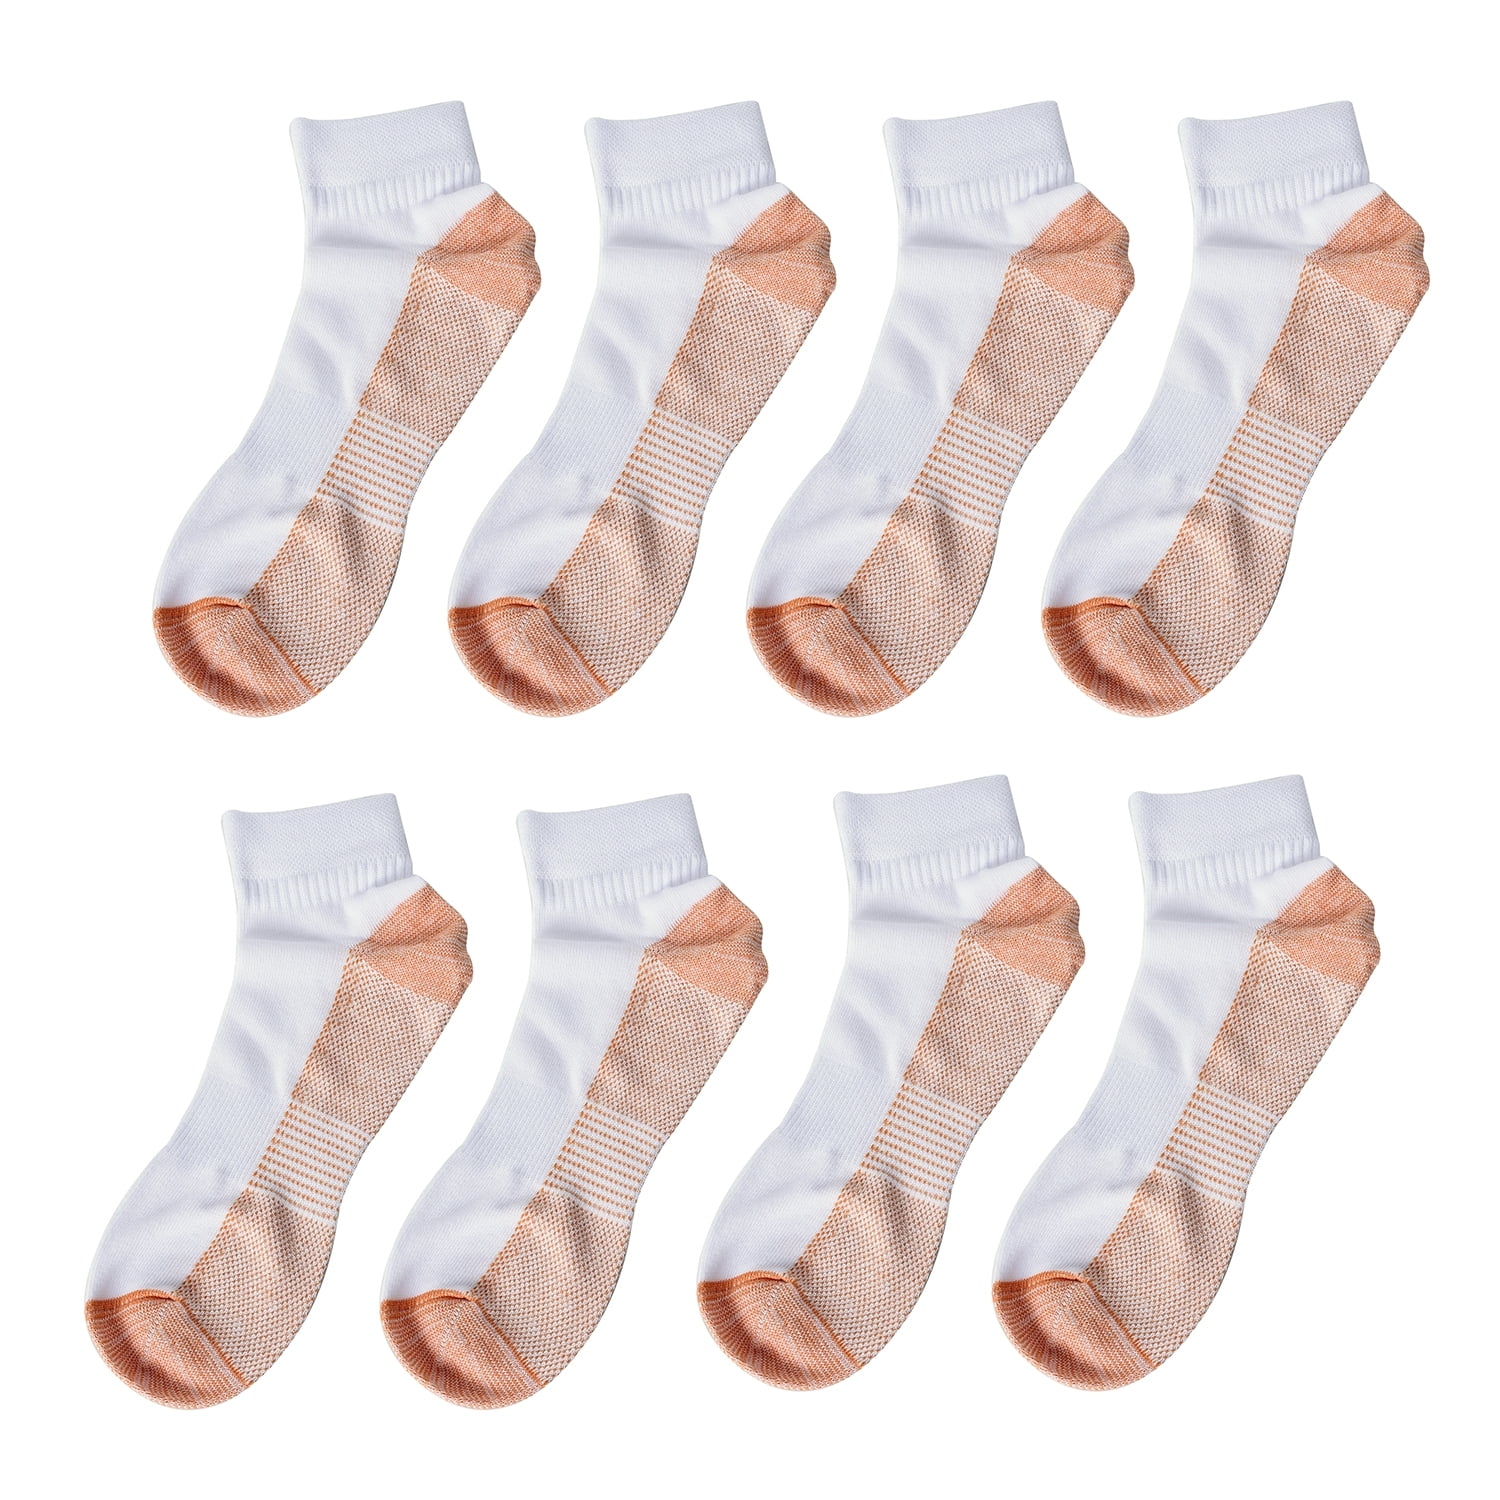 White 4 Pairs Copper Compression Ankle Socks Everyday Wear Comfortable ...